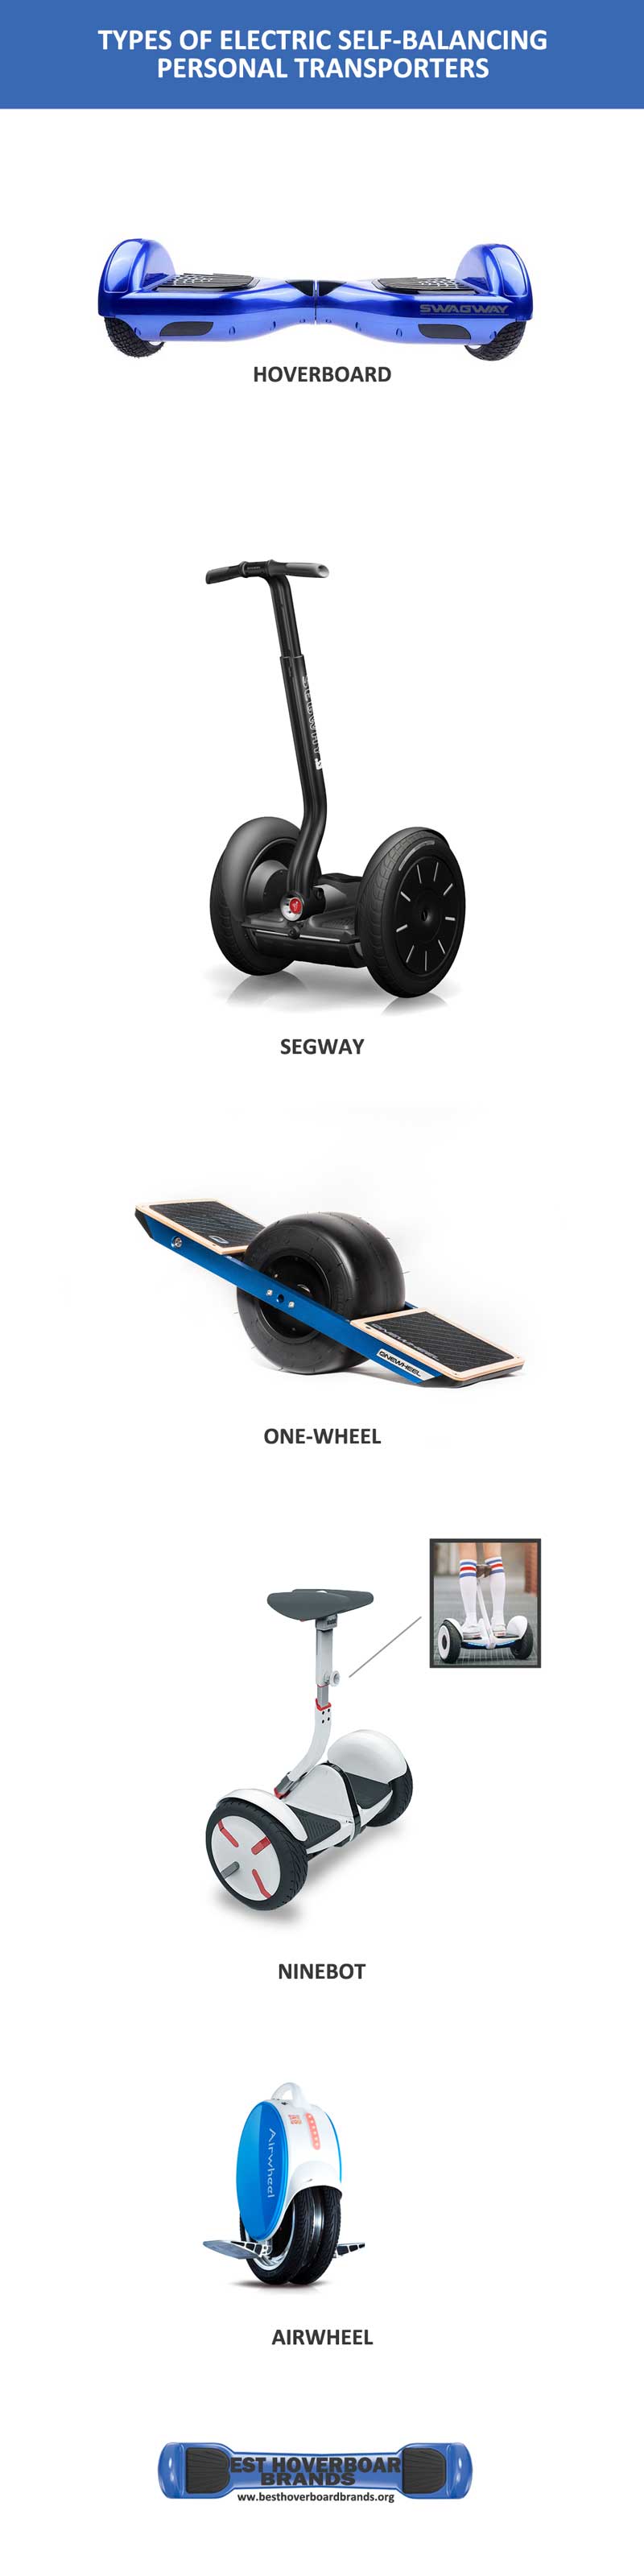 Hover-Board-Types-Of-Self-balancing-Scooters